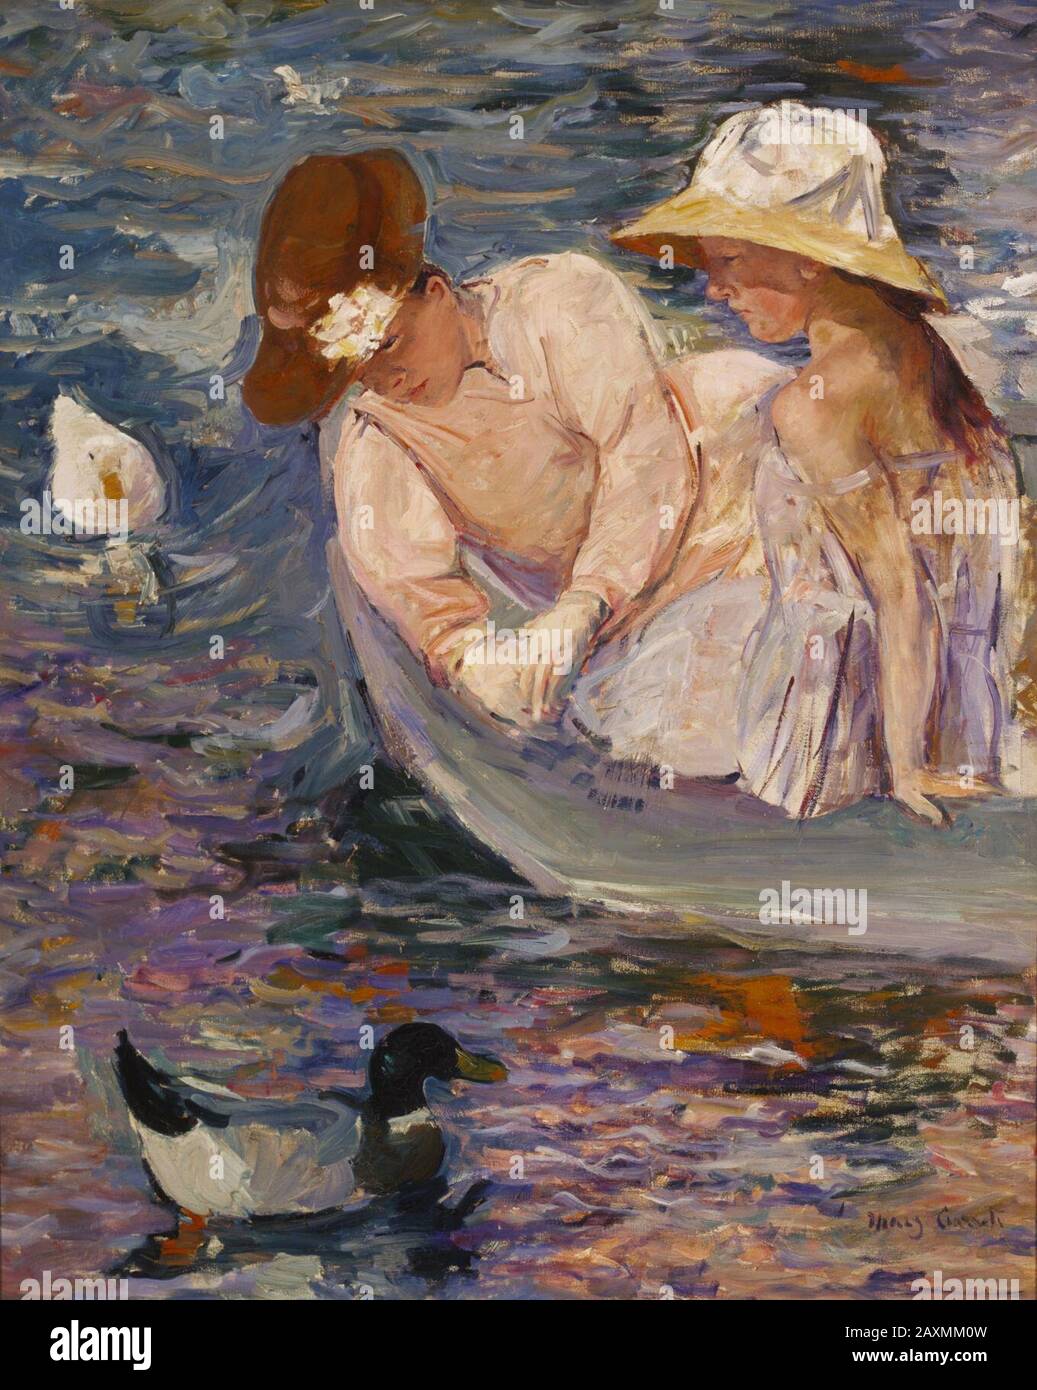 'English: Summertime 1894 Oil on canvas Image: 39 5/8 x 32 in. (100.6 x 81.3 cm) Frame: 49 1/8 x 41 1/2 in. (124.8 x 105.4 cm) Terra Foundation for American Art, Daniel J. Terra Collection, 1988.25  Signed: Lower right: Mary Cassatt; 16 November 2013, 12:42:11; http://www.terraamericanart.org/collection/; Mary Cassatt  (1844–1926)         Alternative names  Mary Stevenson Cassatt; Mary Stevenson; Cassatt; cassatt mary; m. cassatt; mary cassat  Description American painter, printmaker and graphic artist  Date of birth/death  22 May 1844 14 June 1926  Location of birth/death  Pittsburgh Le Mesni Stock Photo